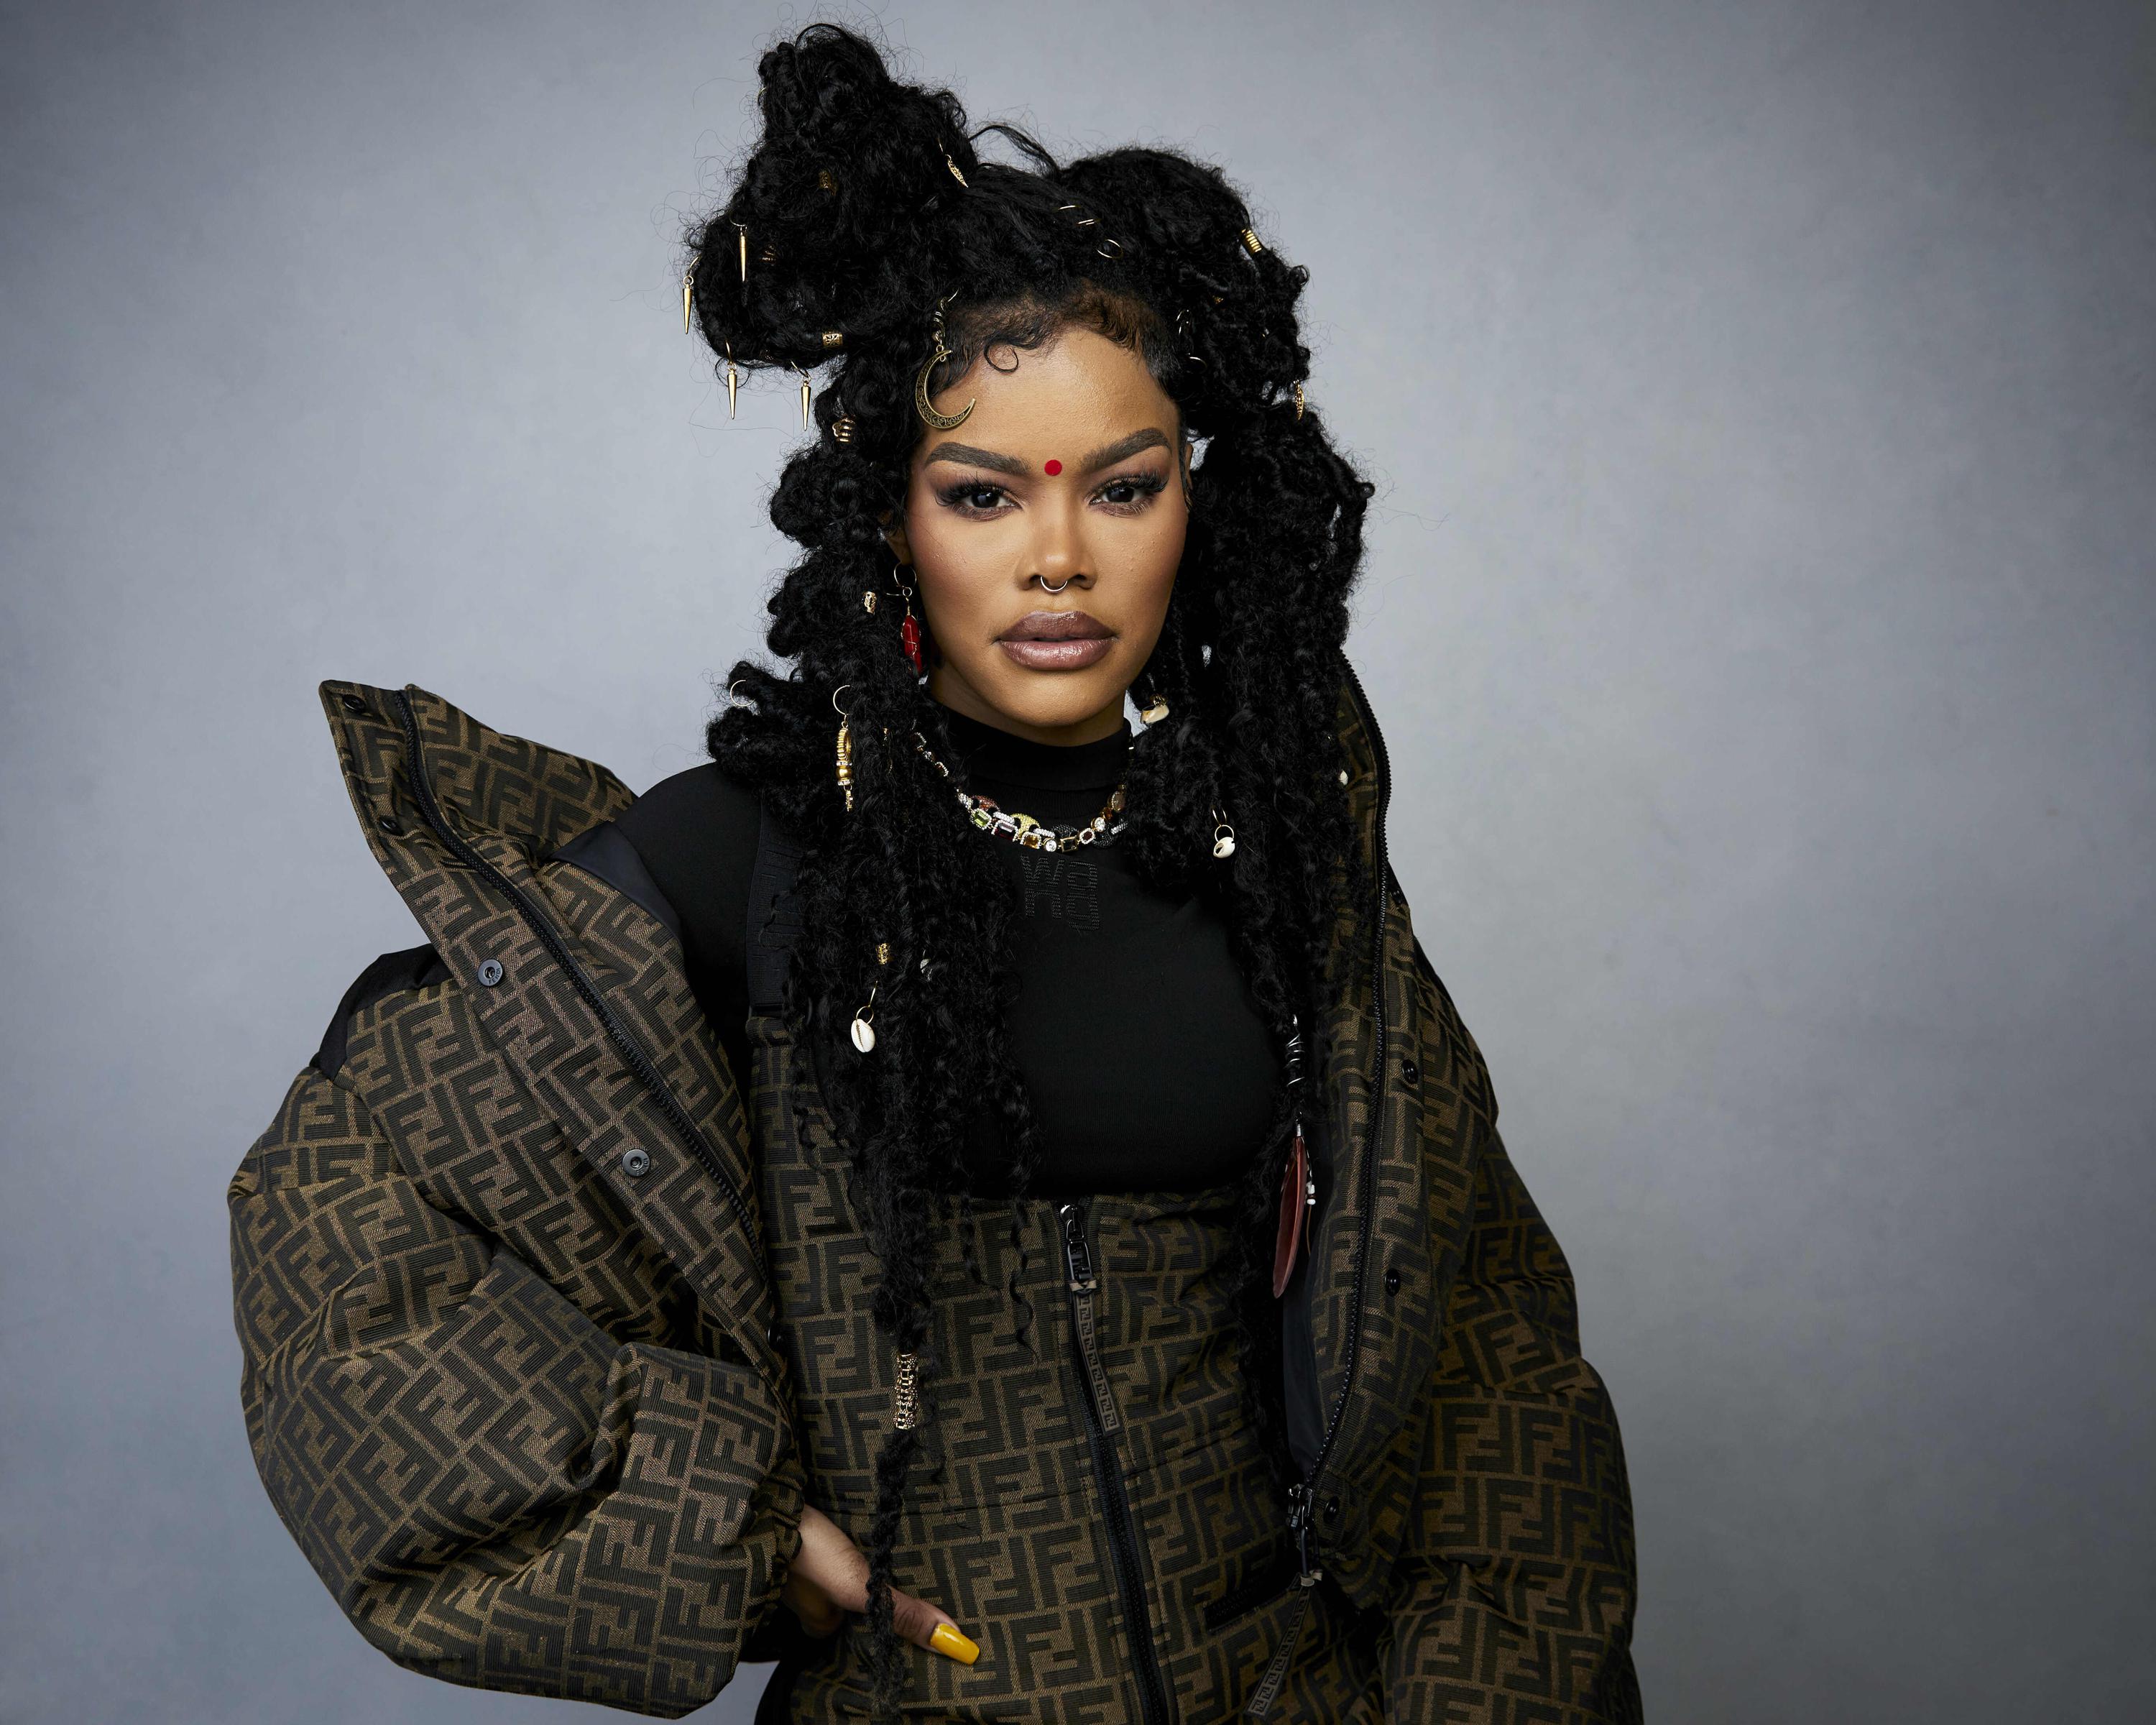 A.V. Rockwell's 'A Thousand and One' With Teyana Taylor Sets Release